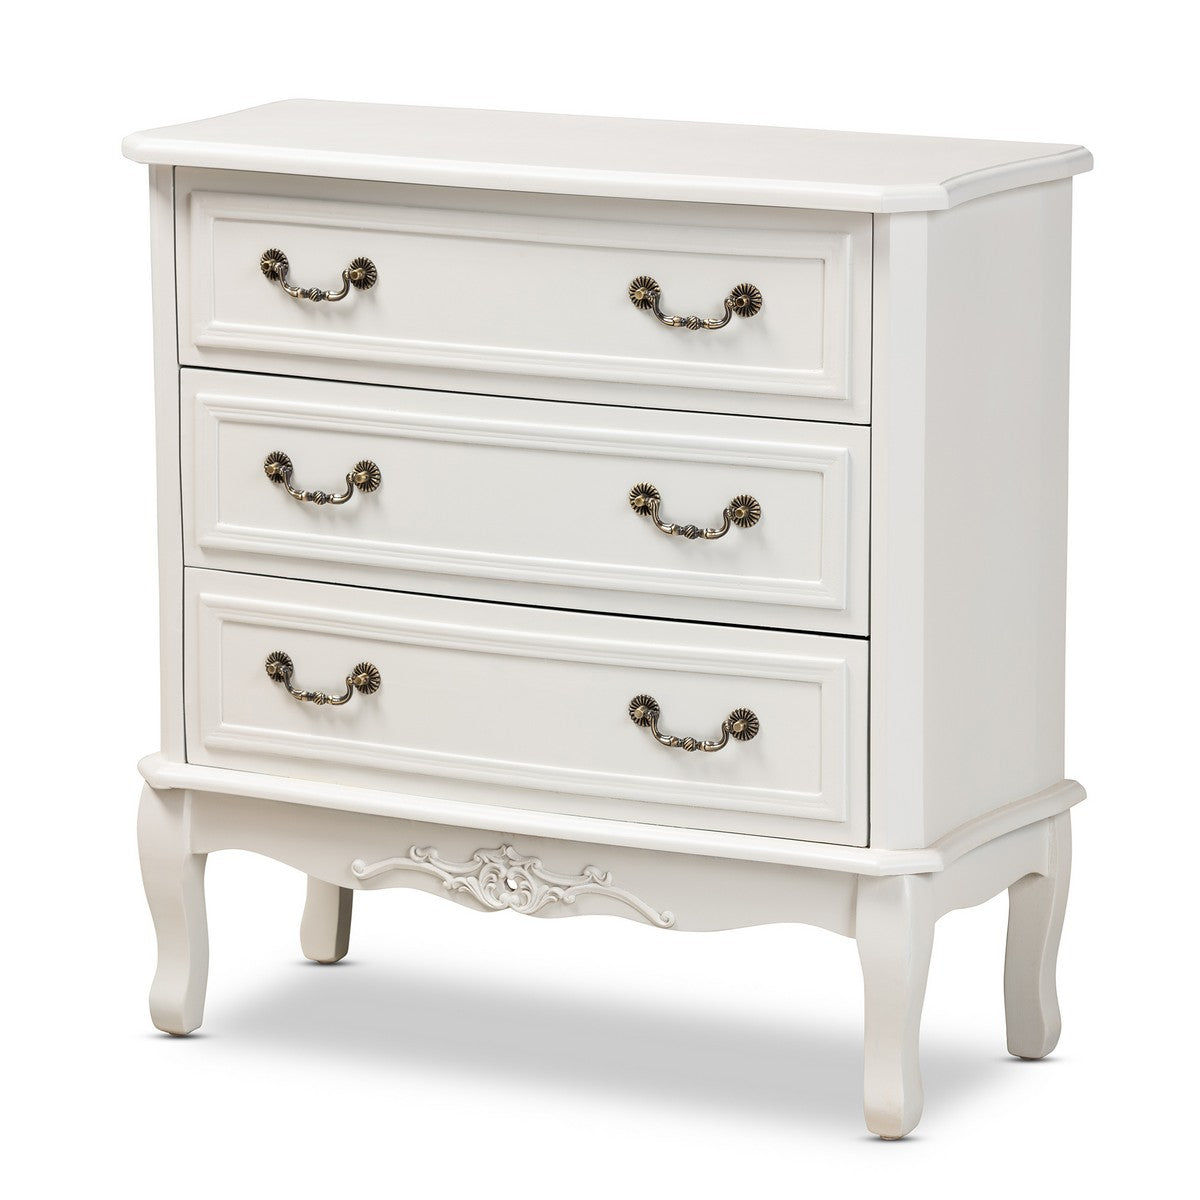 Baxton Studio Gabrielle Traditional French Country Provincial White-Finished 3-Drawer Wood Dresser Baxton Studio-Dresser-Minimal And Modern - 1